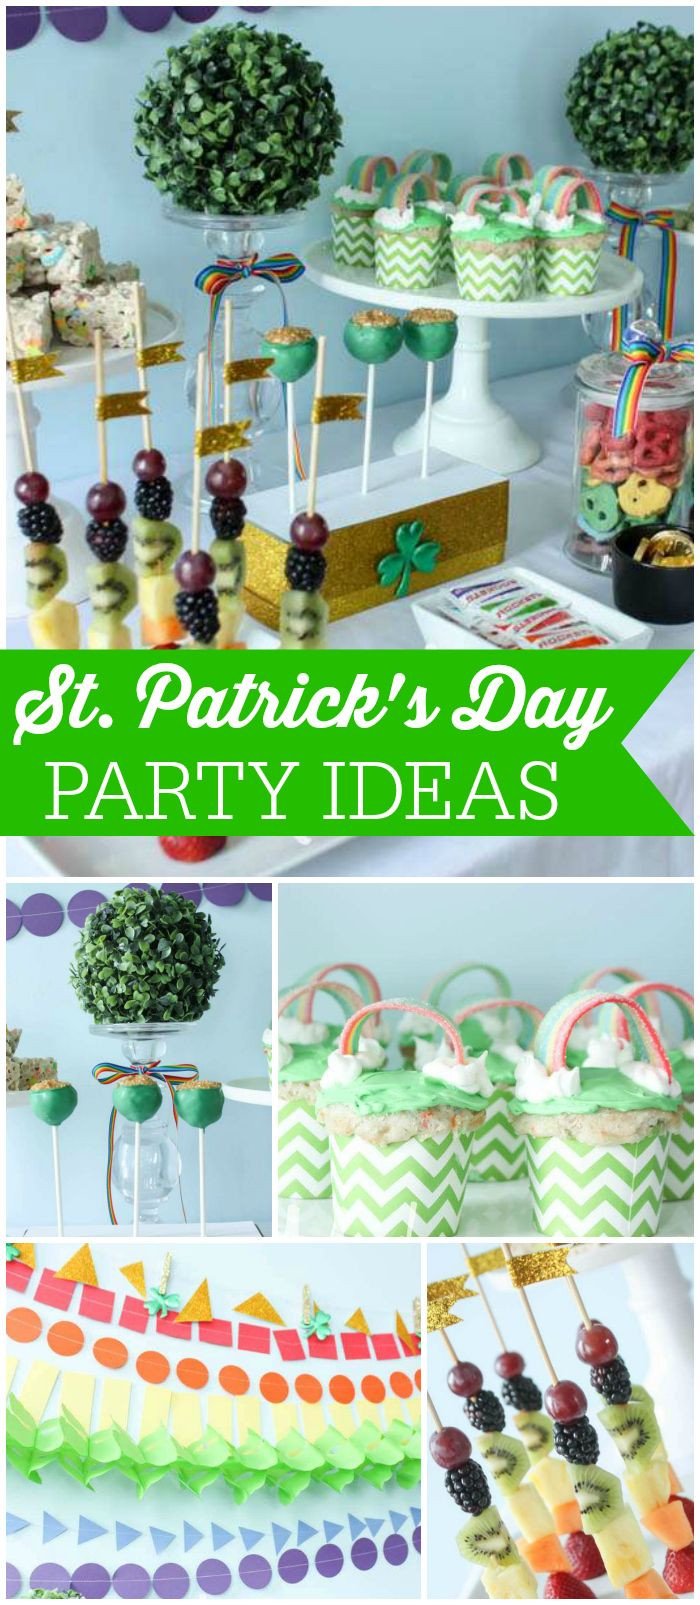 St Patrick's Day Food Ideas For Parties
 251 best images about St Patrick s Day Party Ideas on